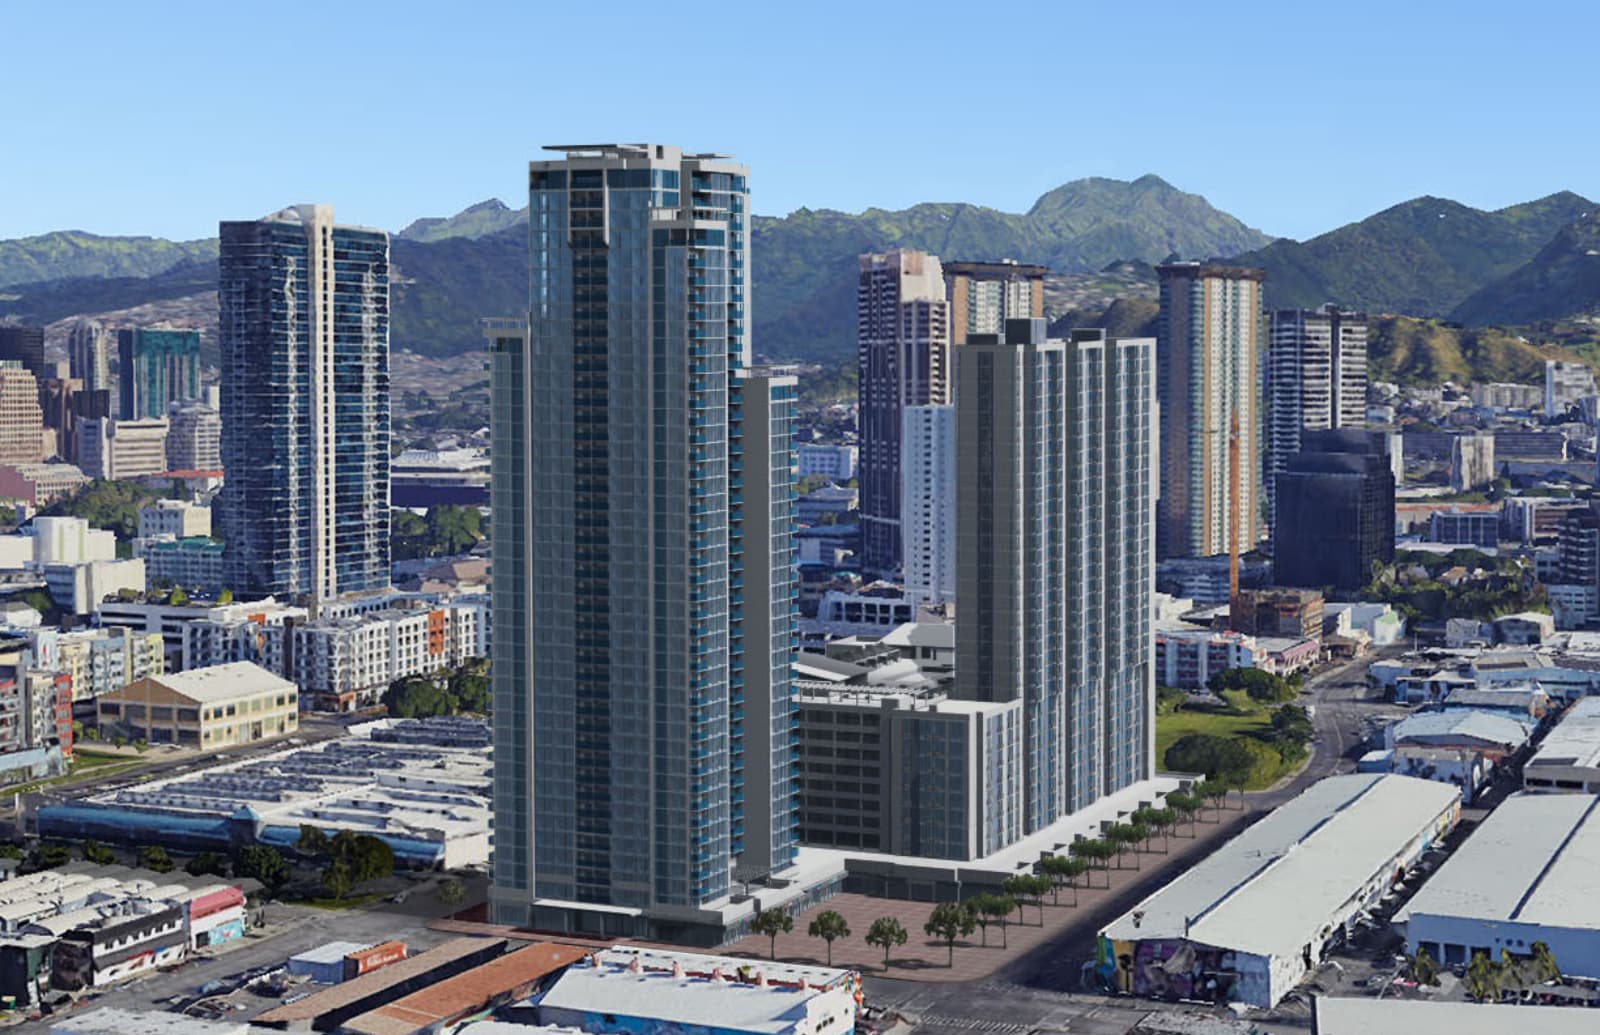 Rendering of Kahuina